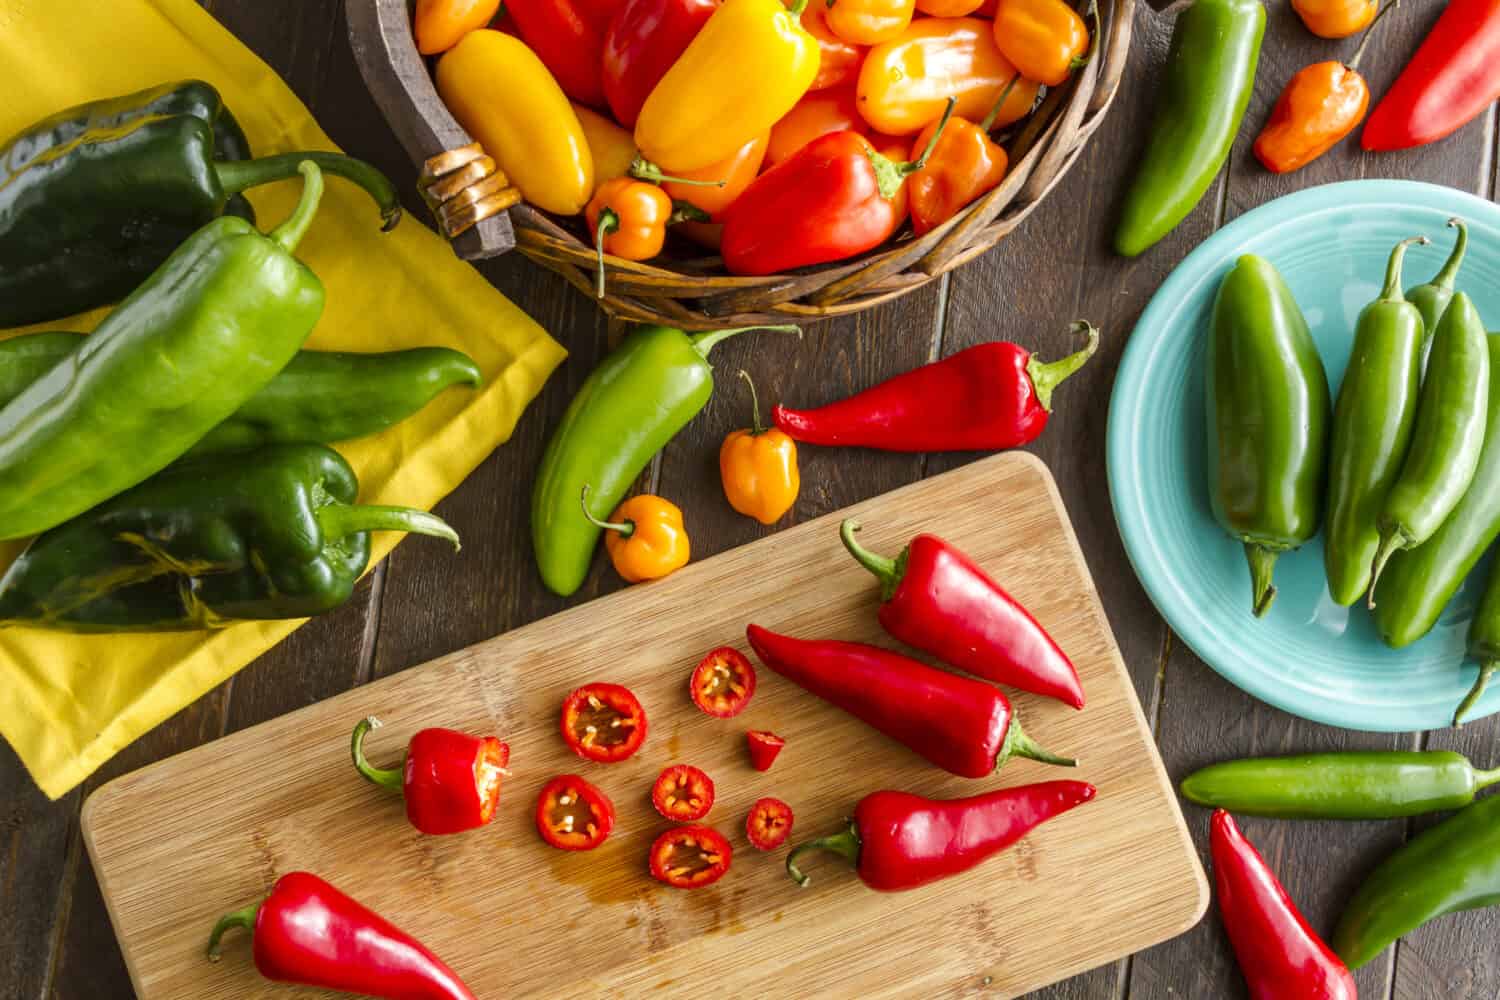 Assorted colorful varieties of hot and sweet peppers sitting on table with cutting board, yellowe napkin and blue plate